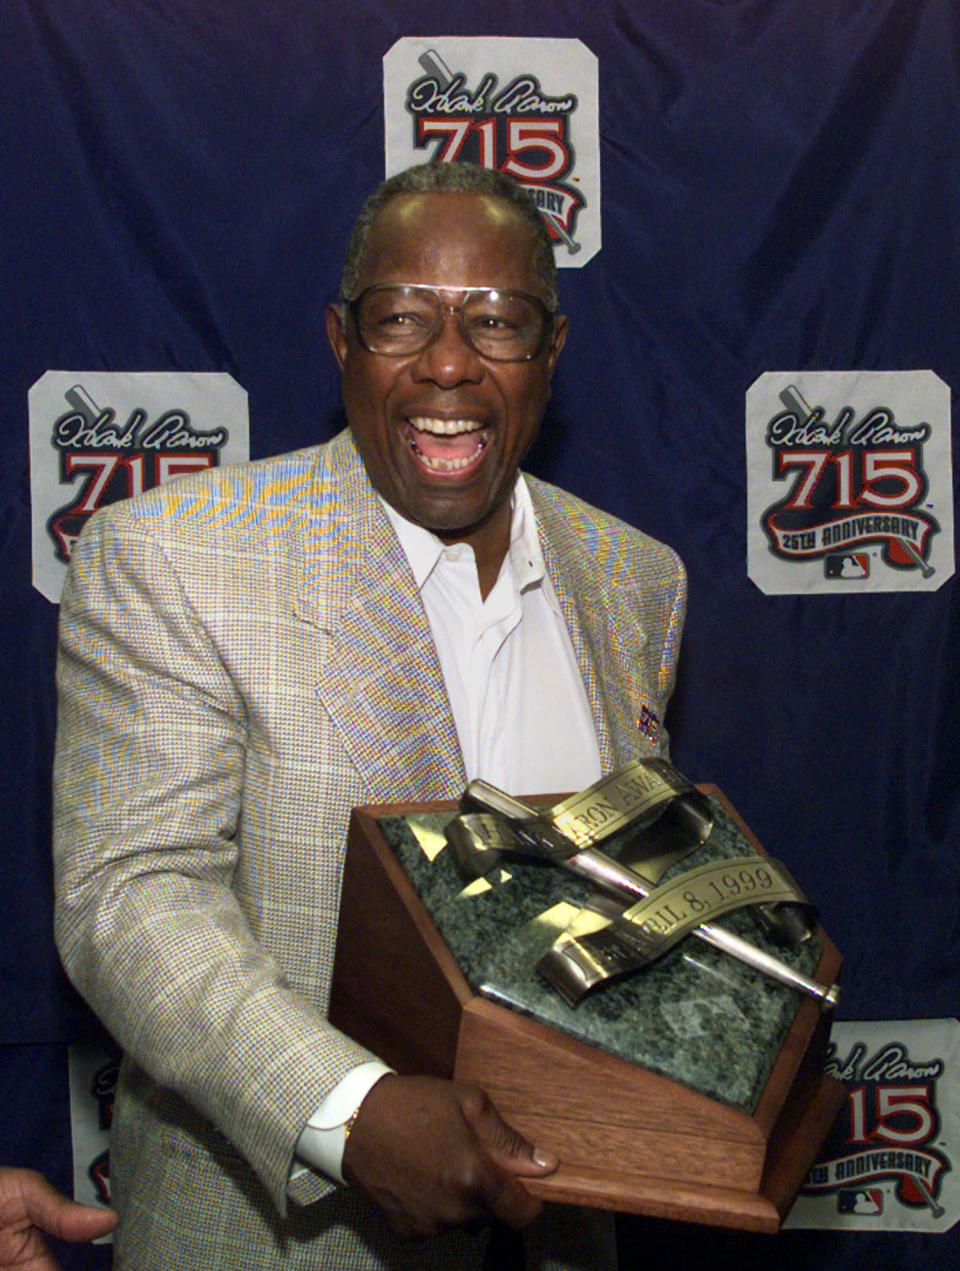 FILE - In this April 8, 1999, file photo, Major League Baseball's all-time career home run record holder Hank Aaron laughs as he shows off the newly unveiled "Hank Aaron Award" during a news conference in Atlanta. Hank Aaron, who endured racist threats with stoic dignity during his pursuit of Babe Ruth’s home run record and gracefully left his mark as one of baseball’s greatest all-around players, died Friday. He was 86. The Atlanta Braves, Aaron's longtime team, said he died peacefully in his sleep. No cause was given. (AP Photo/John Bazemore, File)